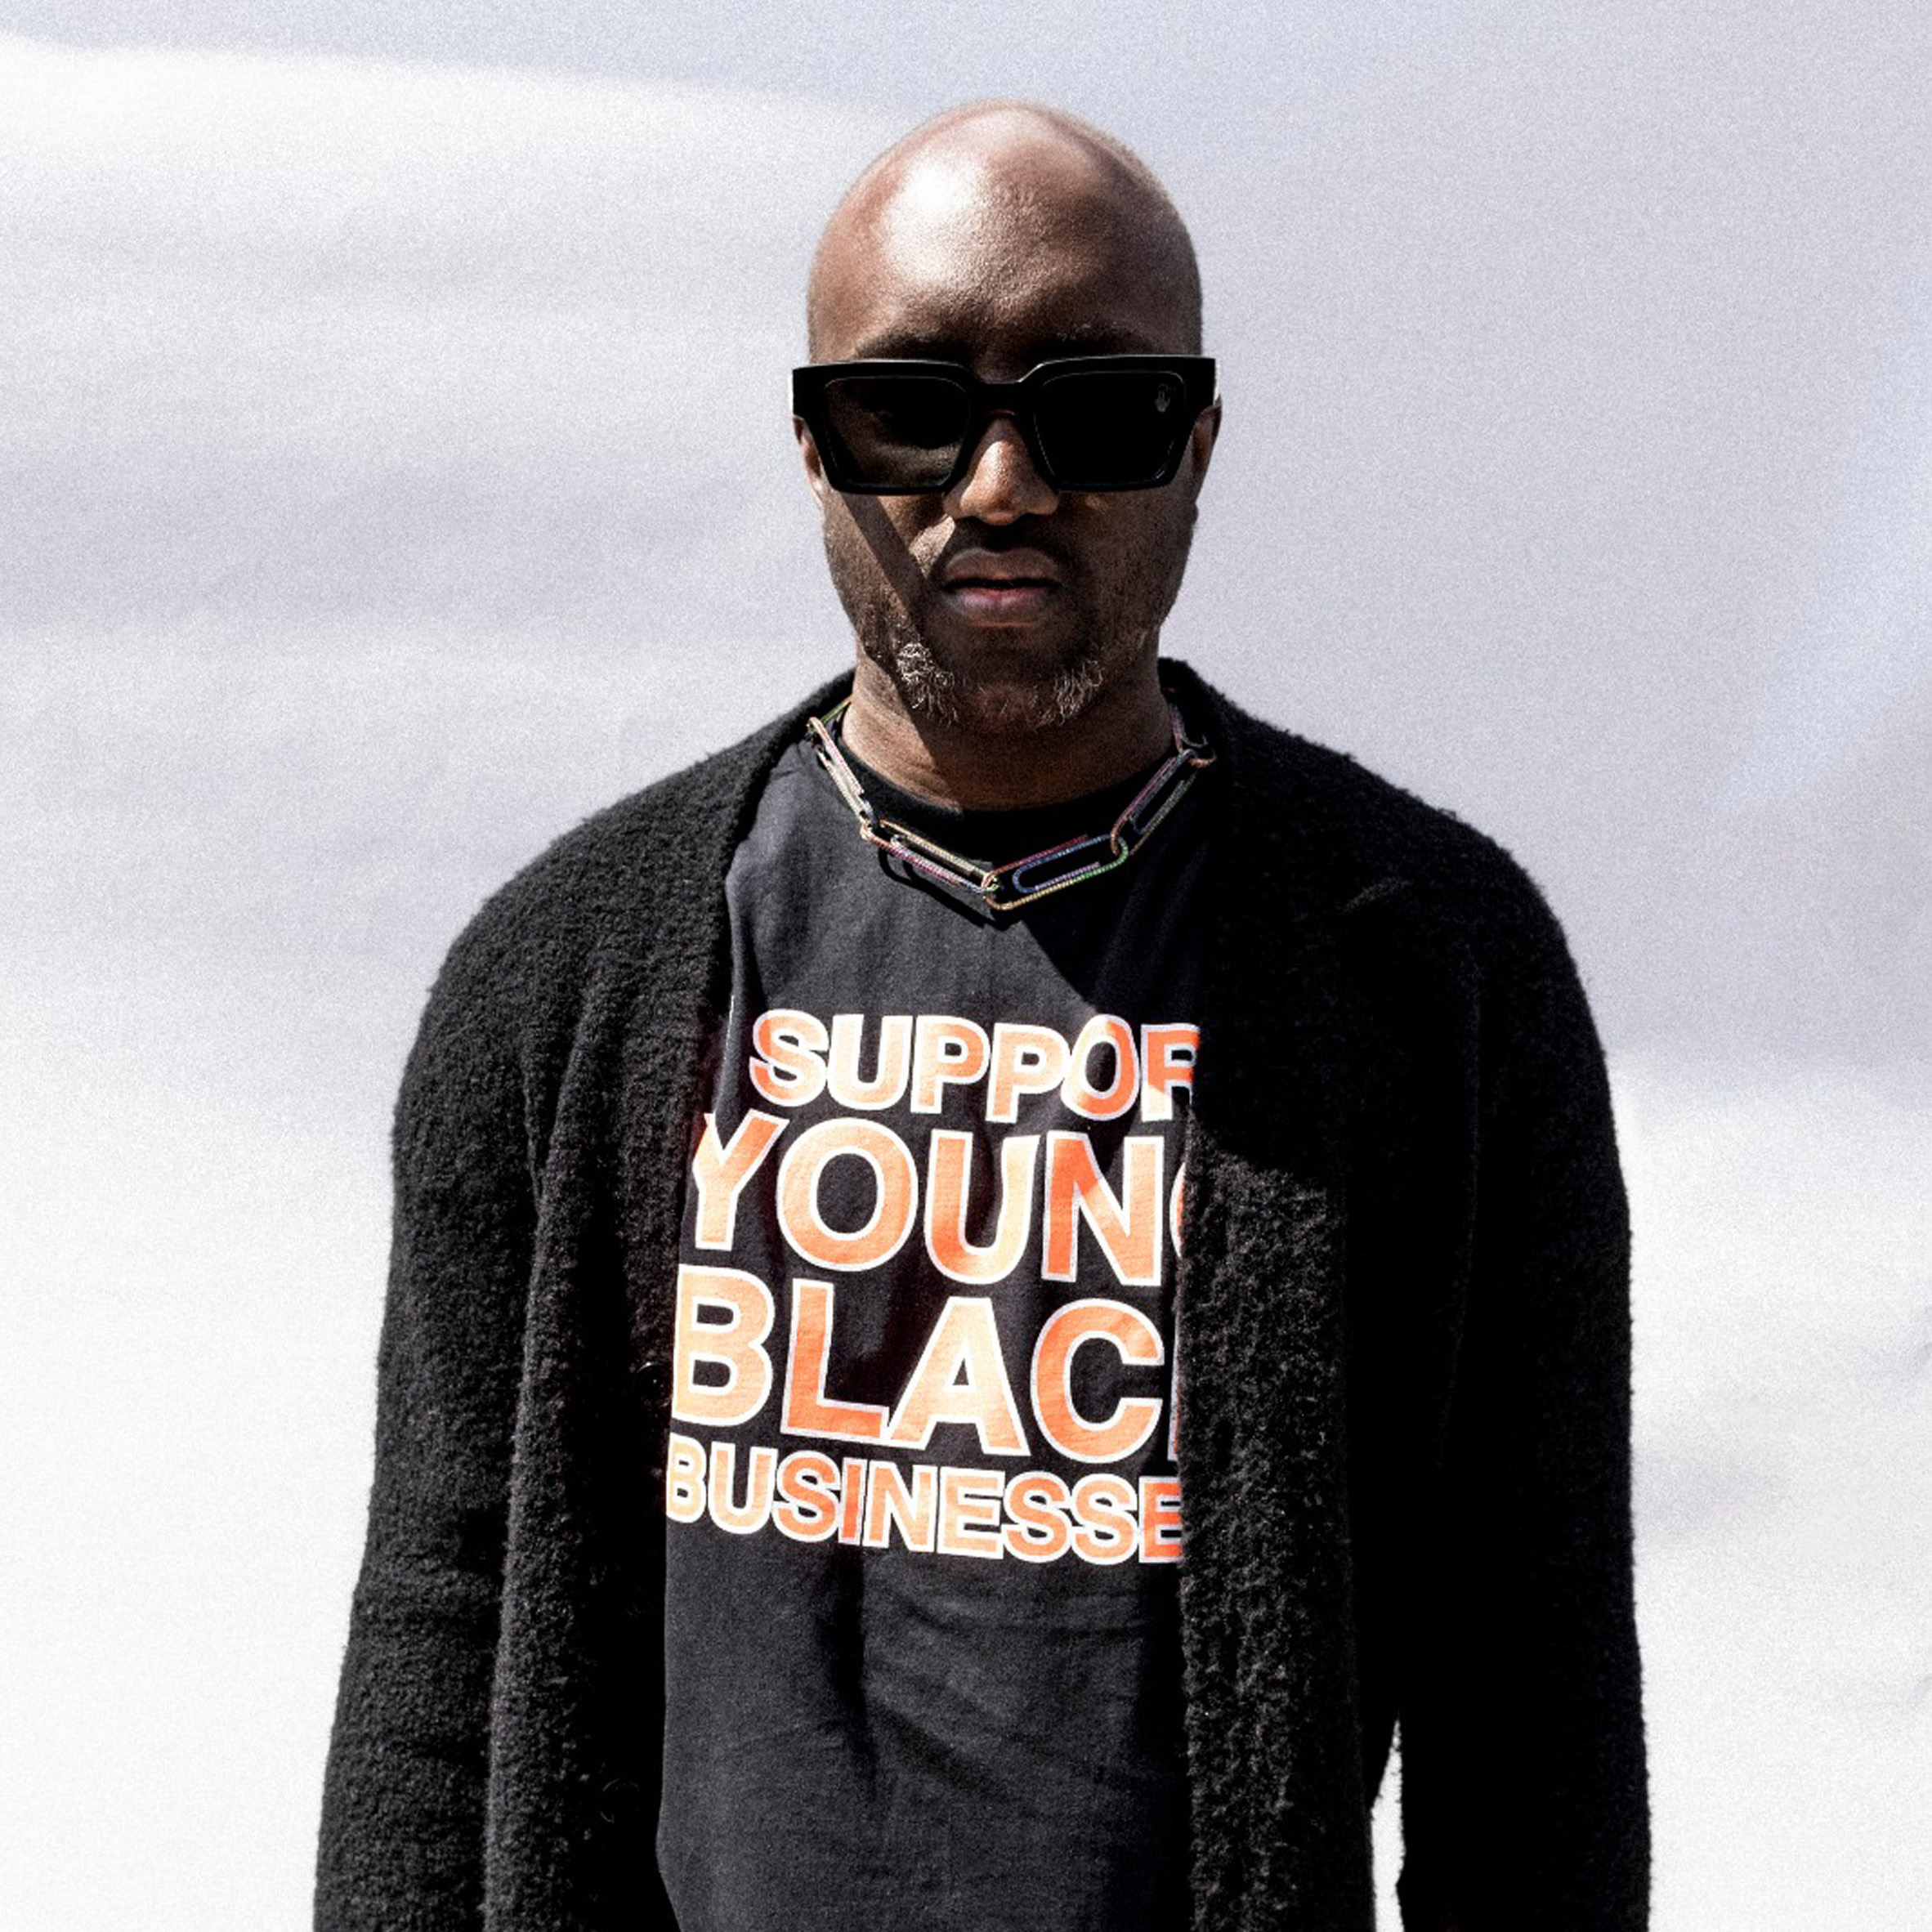 Op-ed: Virgil Abloh dissolved 'barriers of entry' with joy and optimism